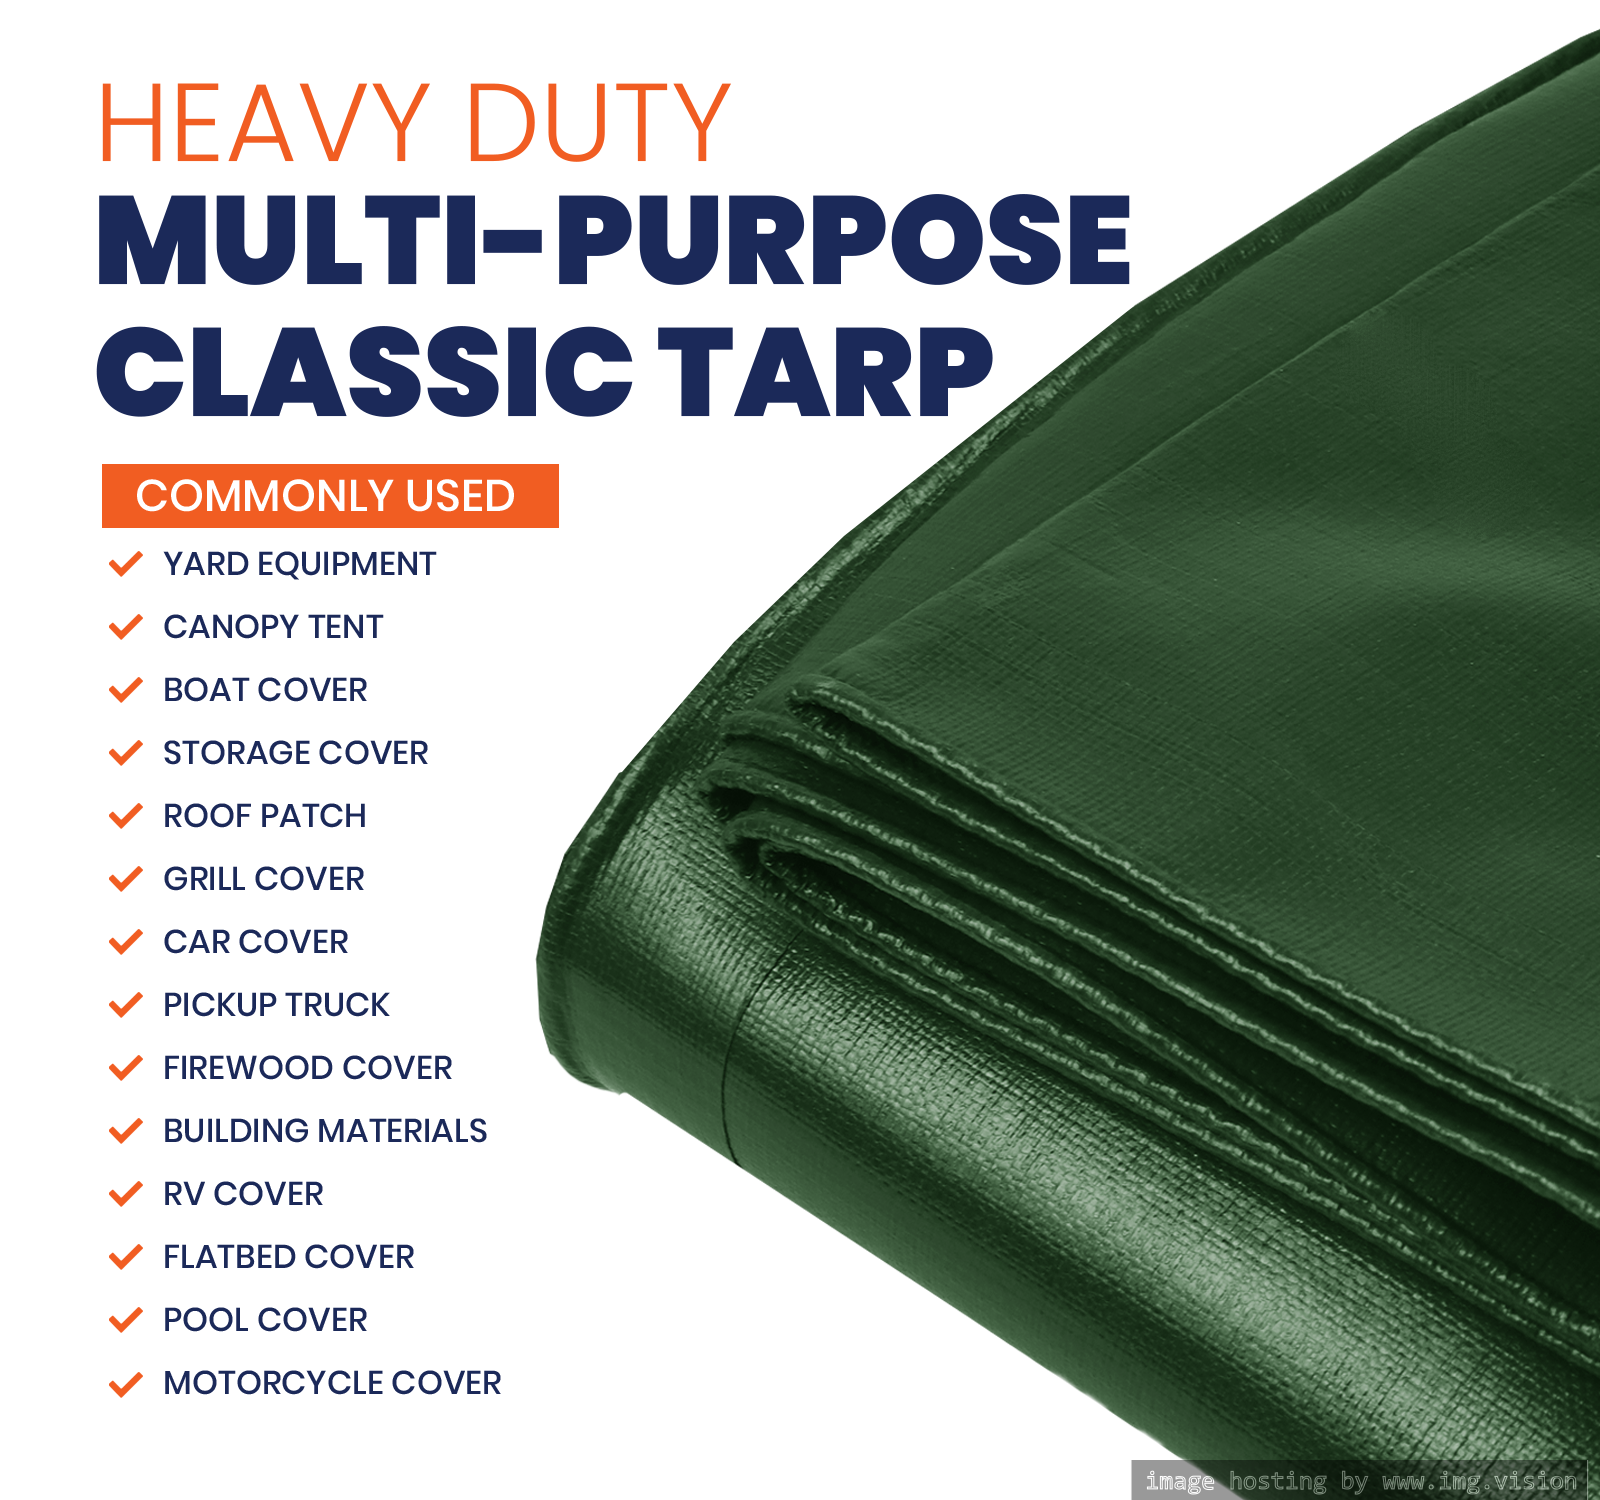 Tarpco Safety Heavy Duty 7 Mil Tarp Cover 30′ X 40′ Green/Black UV Resistant, Rip and Tear Proof.